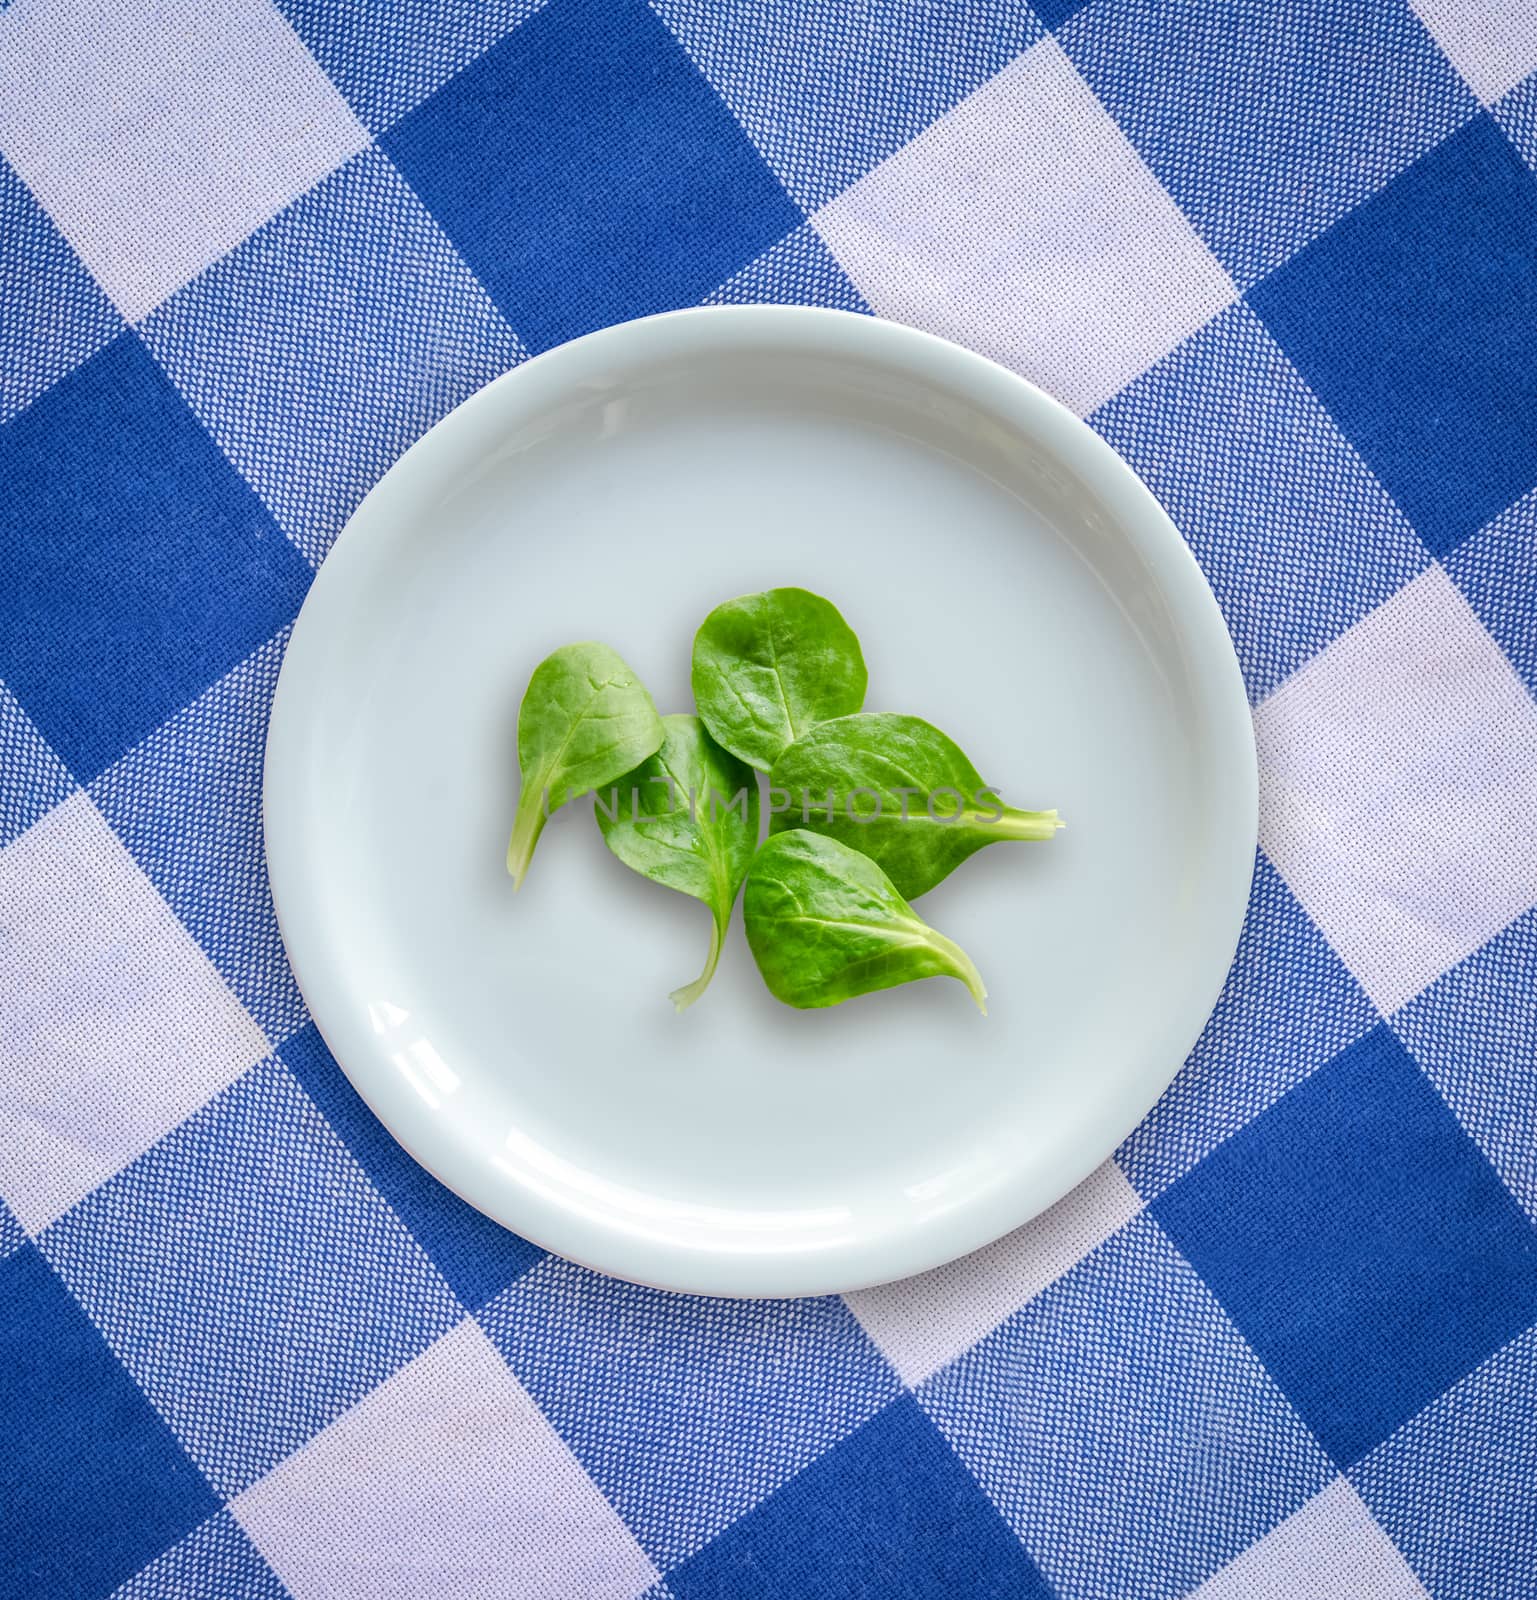 Diet Concept Image Of  Spinach Salad Leaves On A White Plate On A Checked Table Cloth